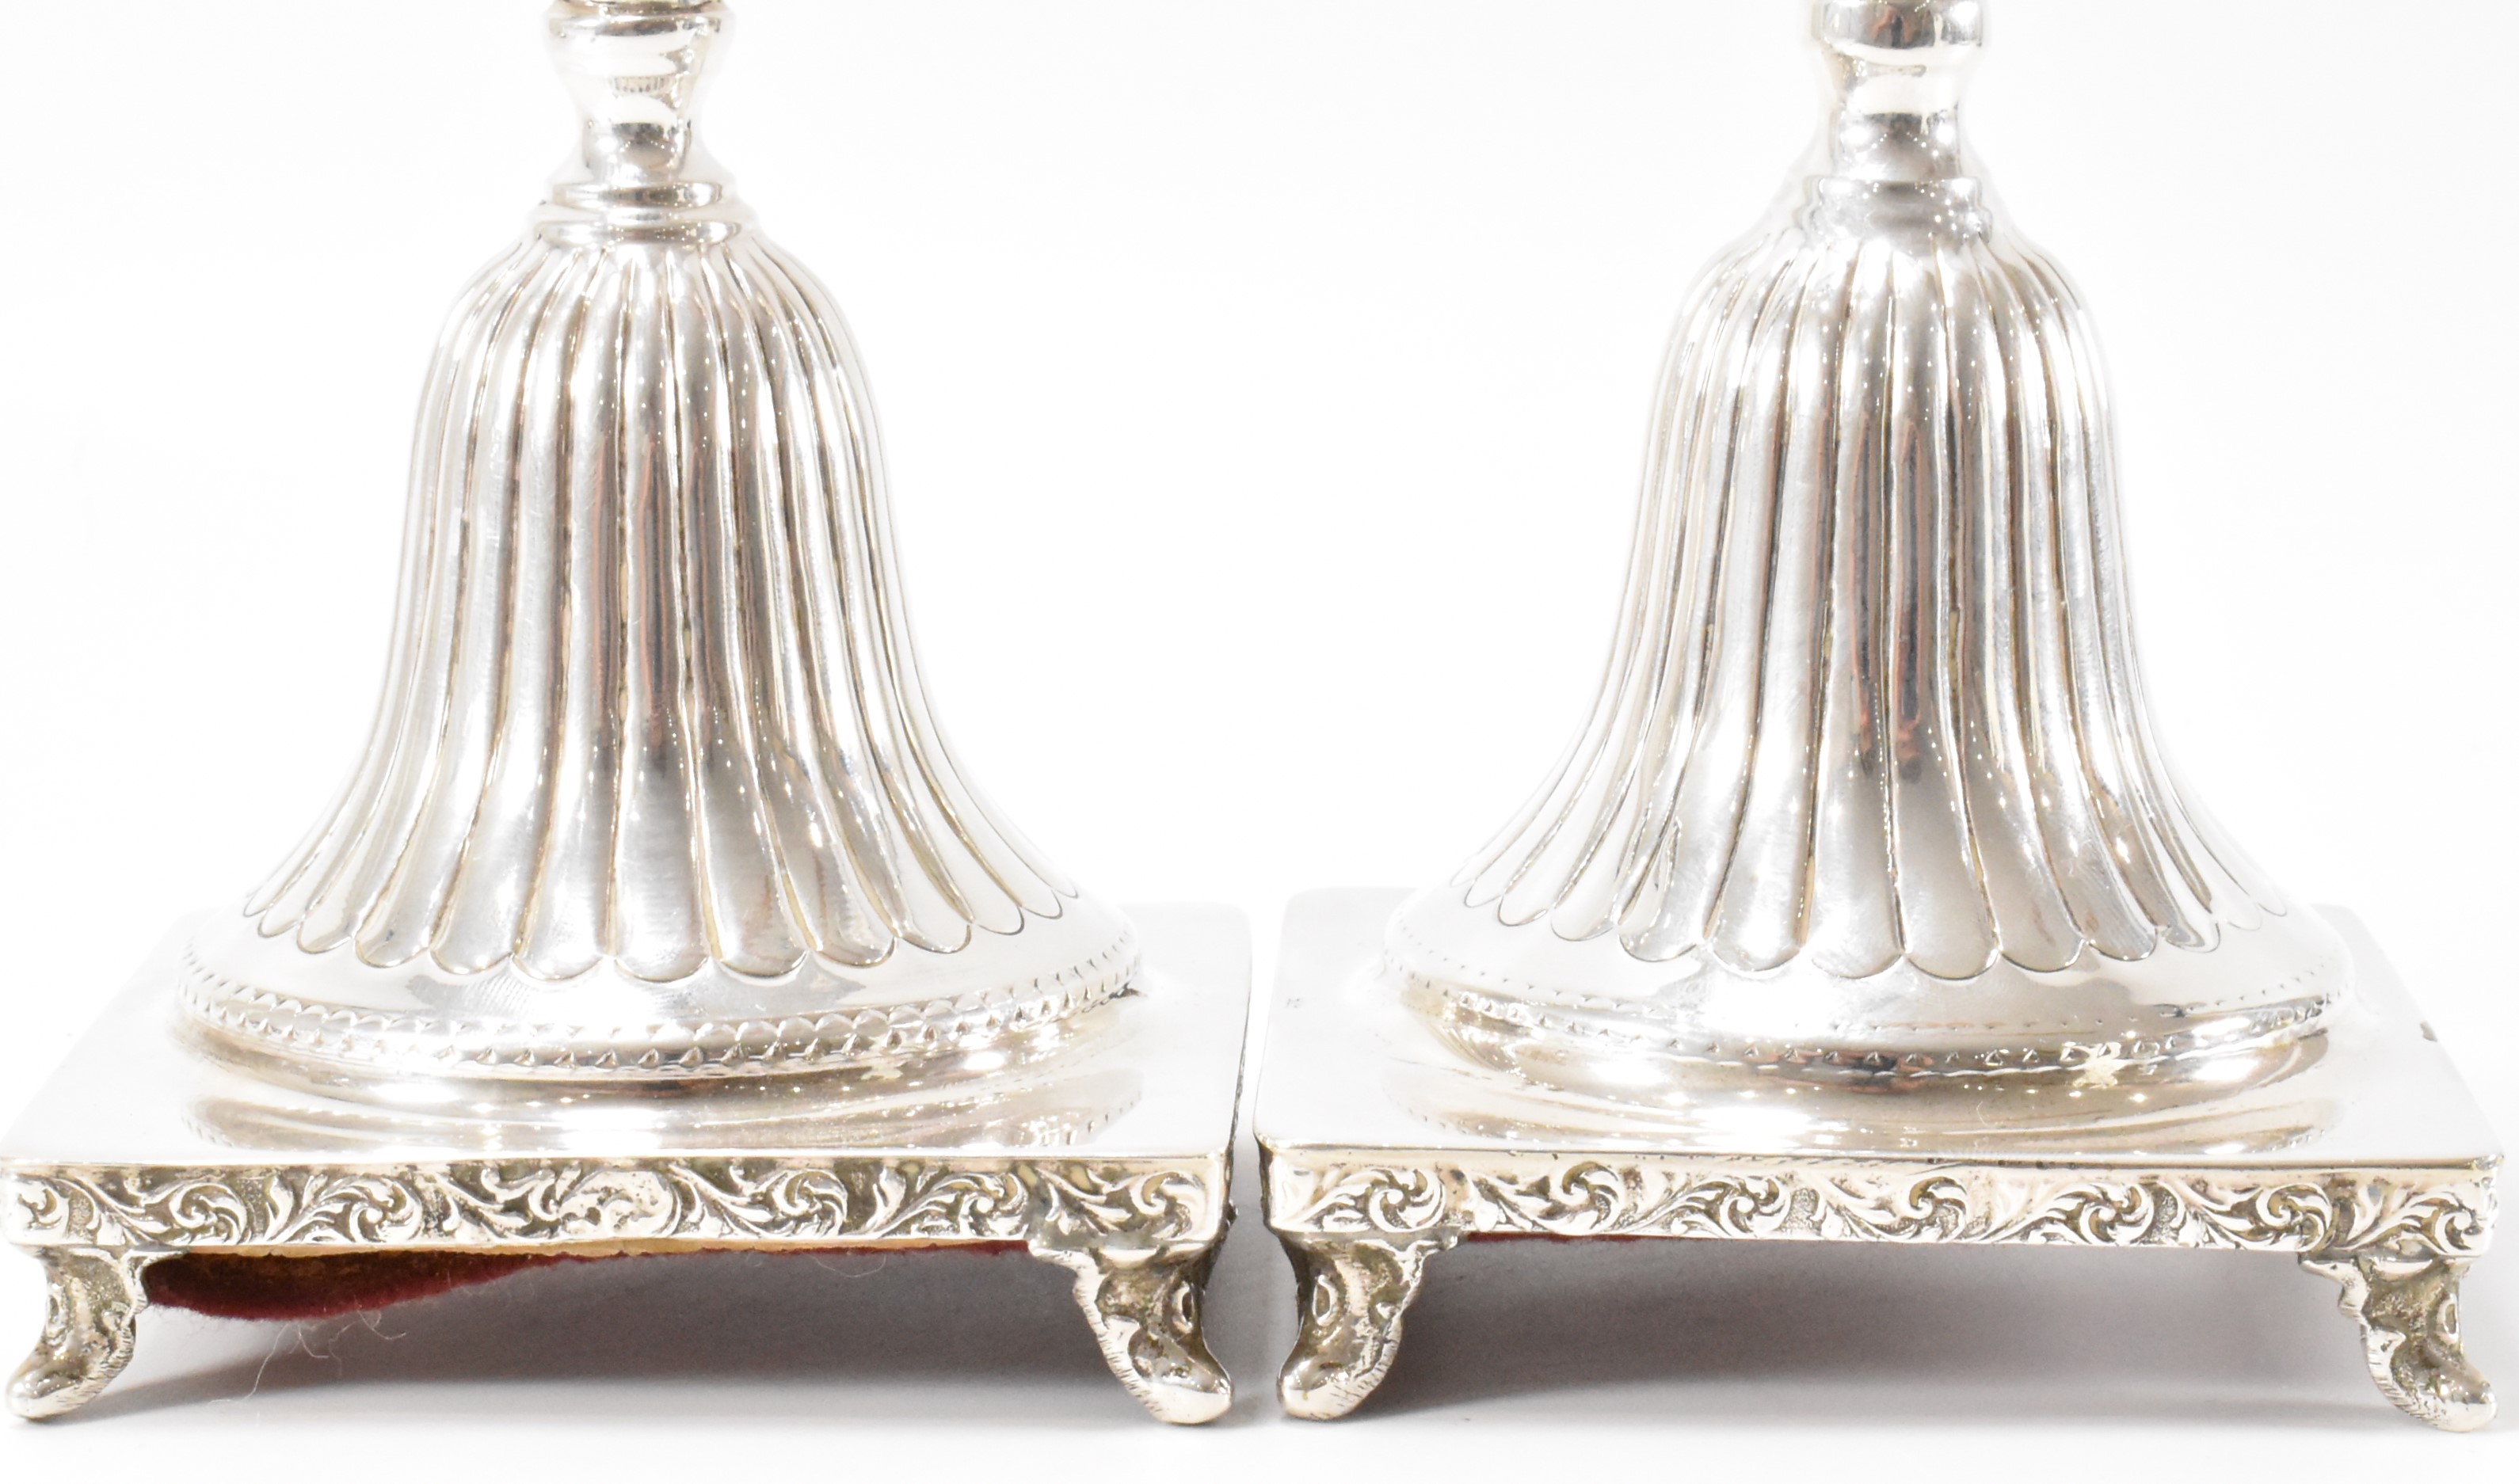 PAIR OF SILVER CANDLESTICKS - Image 3 of 4